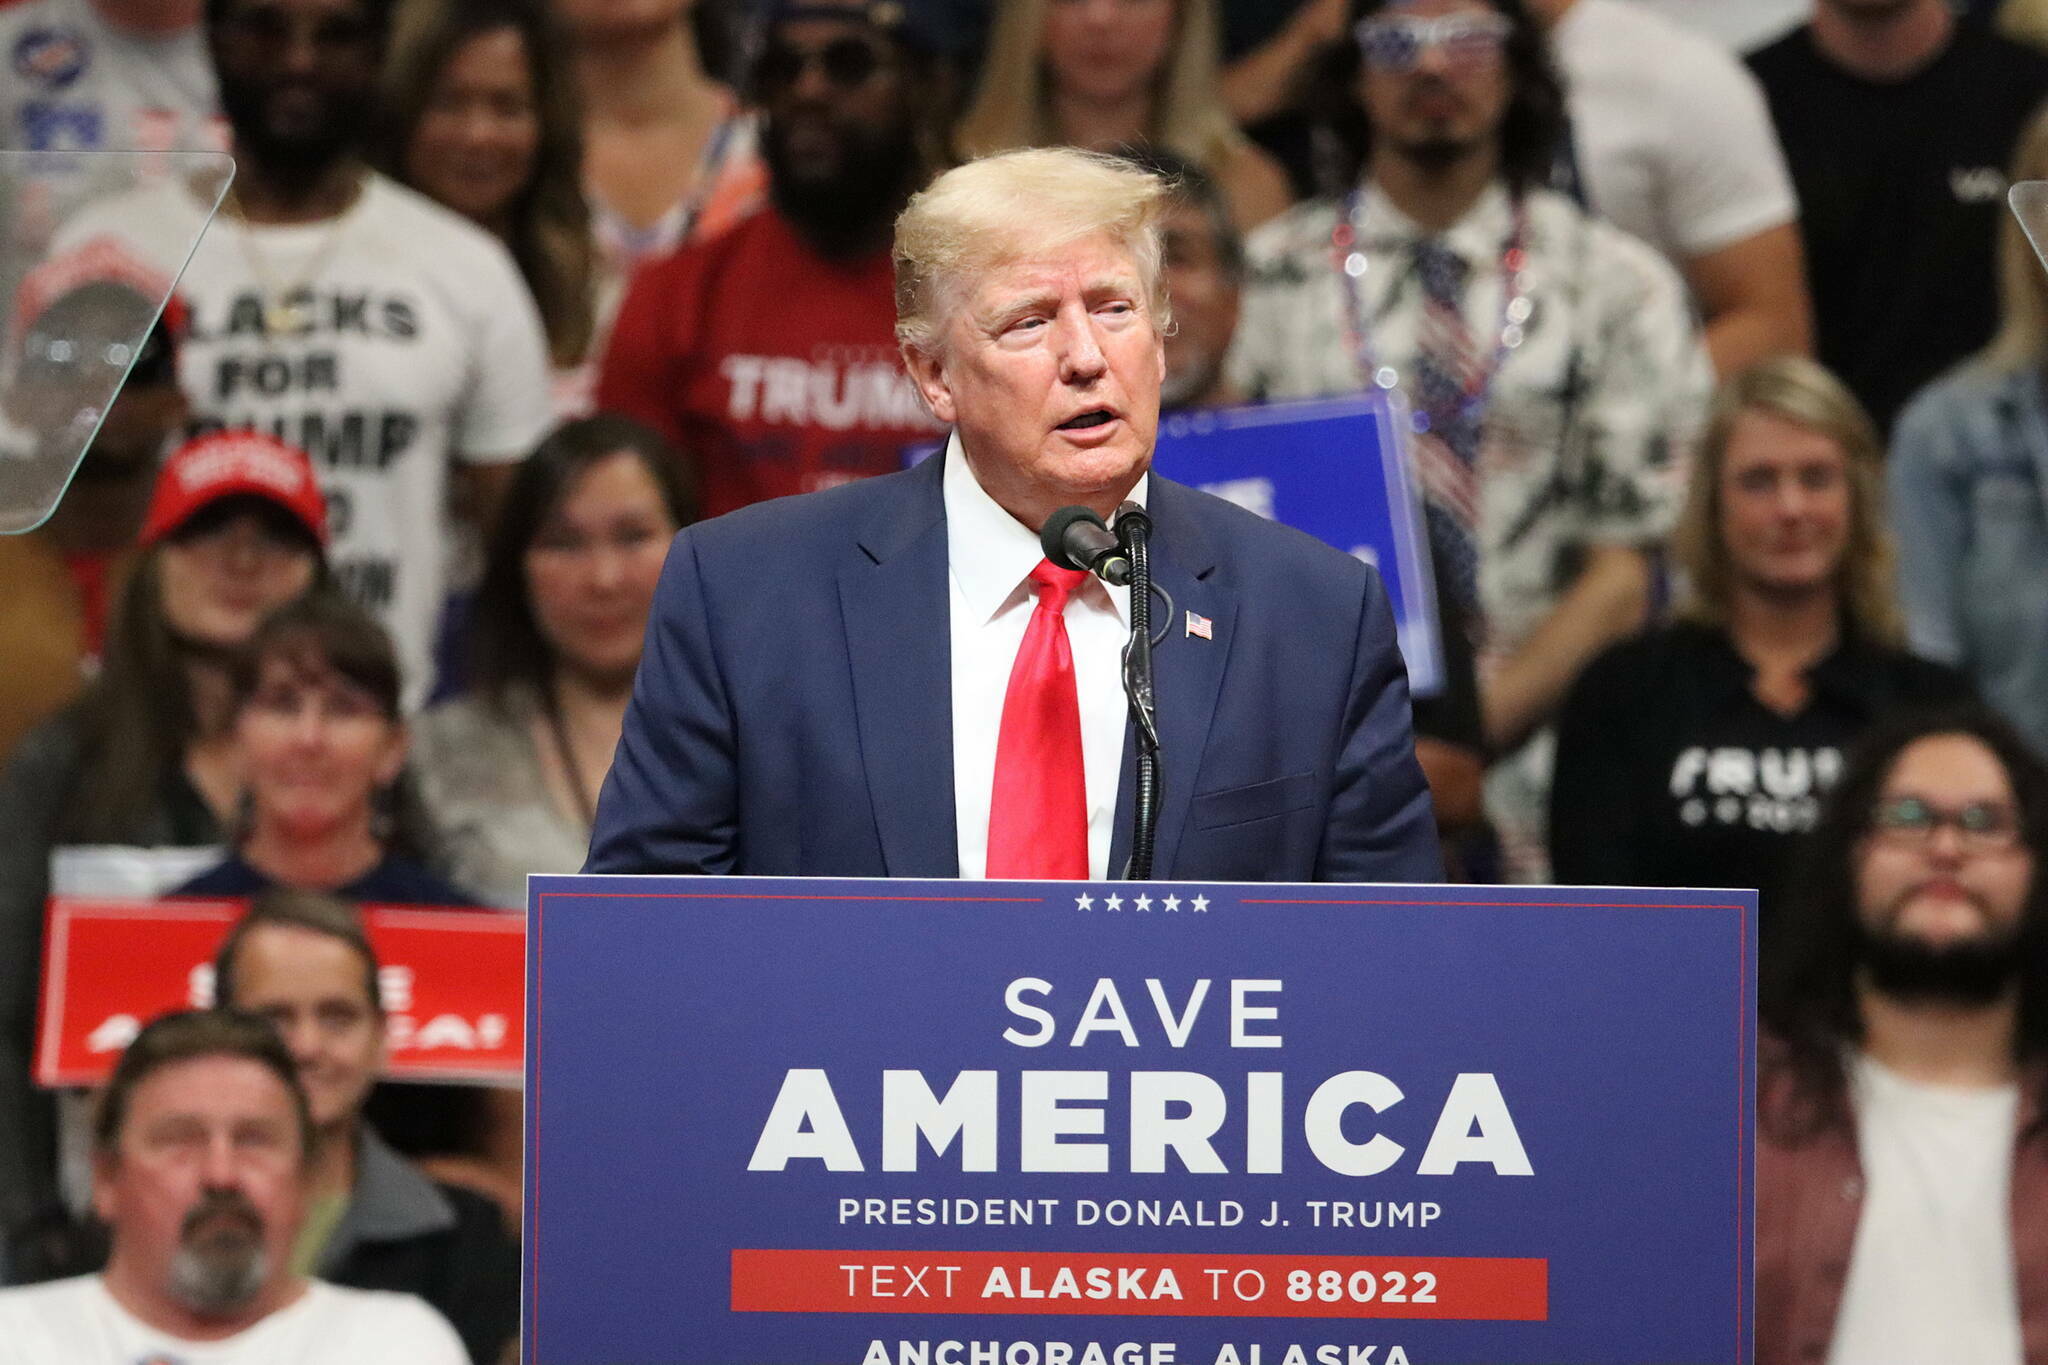 Former President Donald Trump speaks to a capacity crowd at the Alaska Airlines Center in Anchorage on July 9, 2022. (Mark Sabbatini / Juneau Empire File)